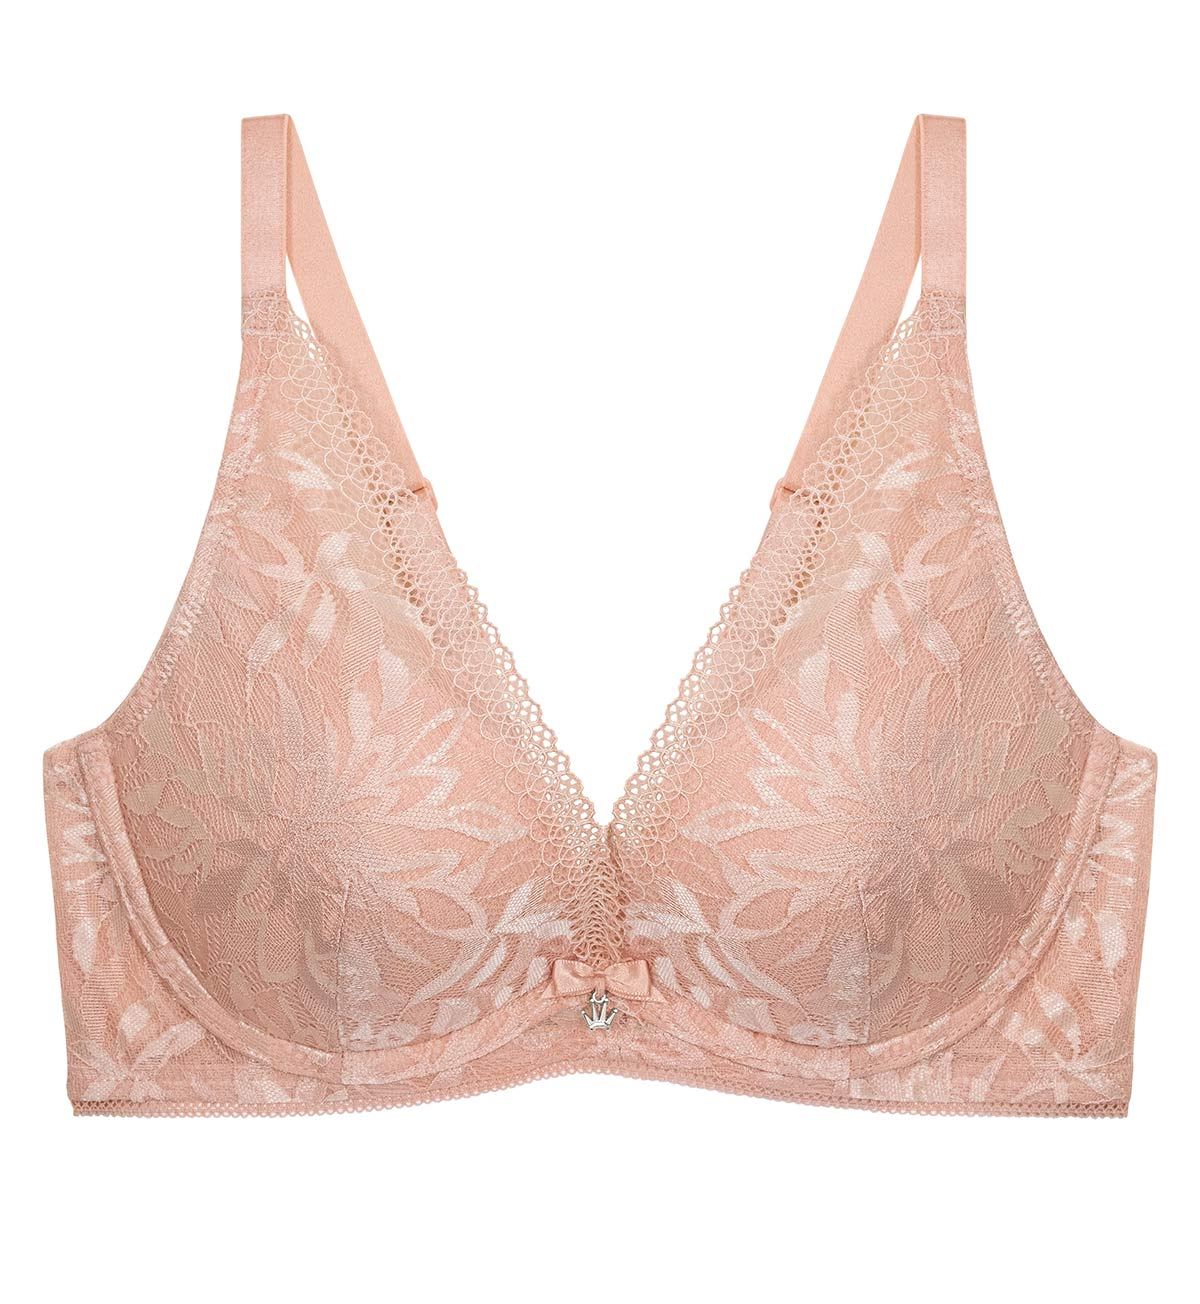 Victoria's Secret PINK Lace Wired Push Up Bralette